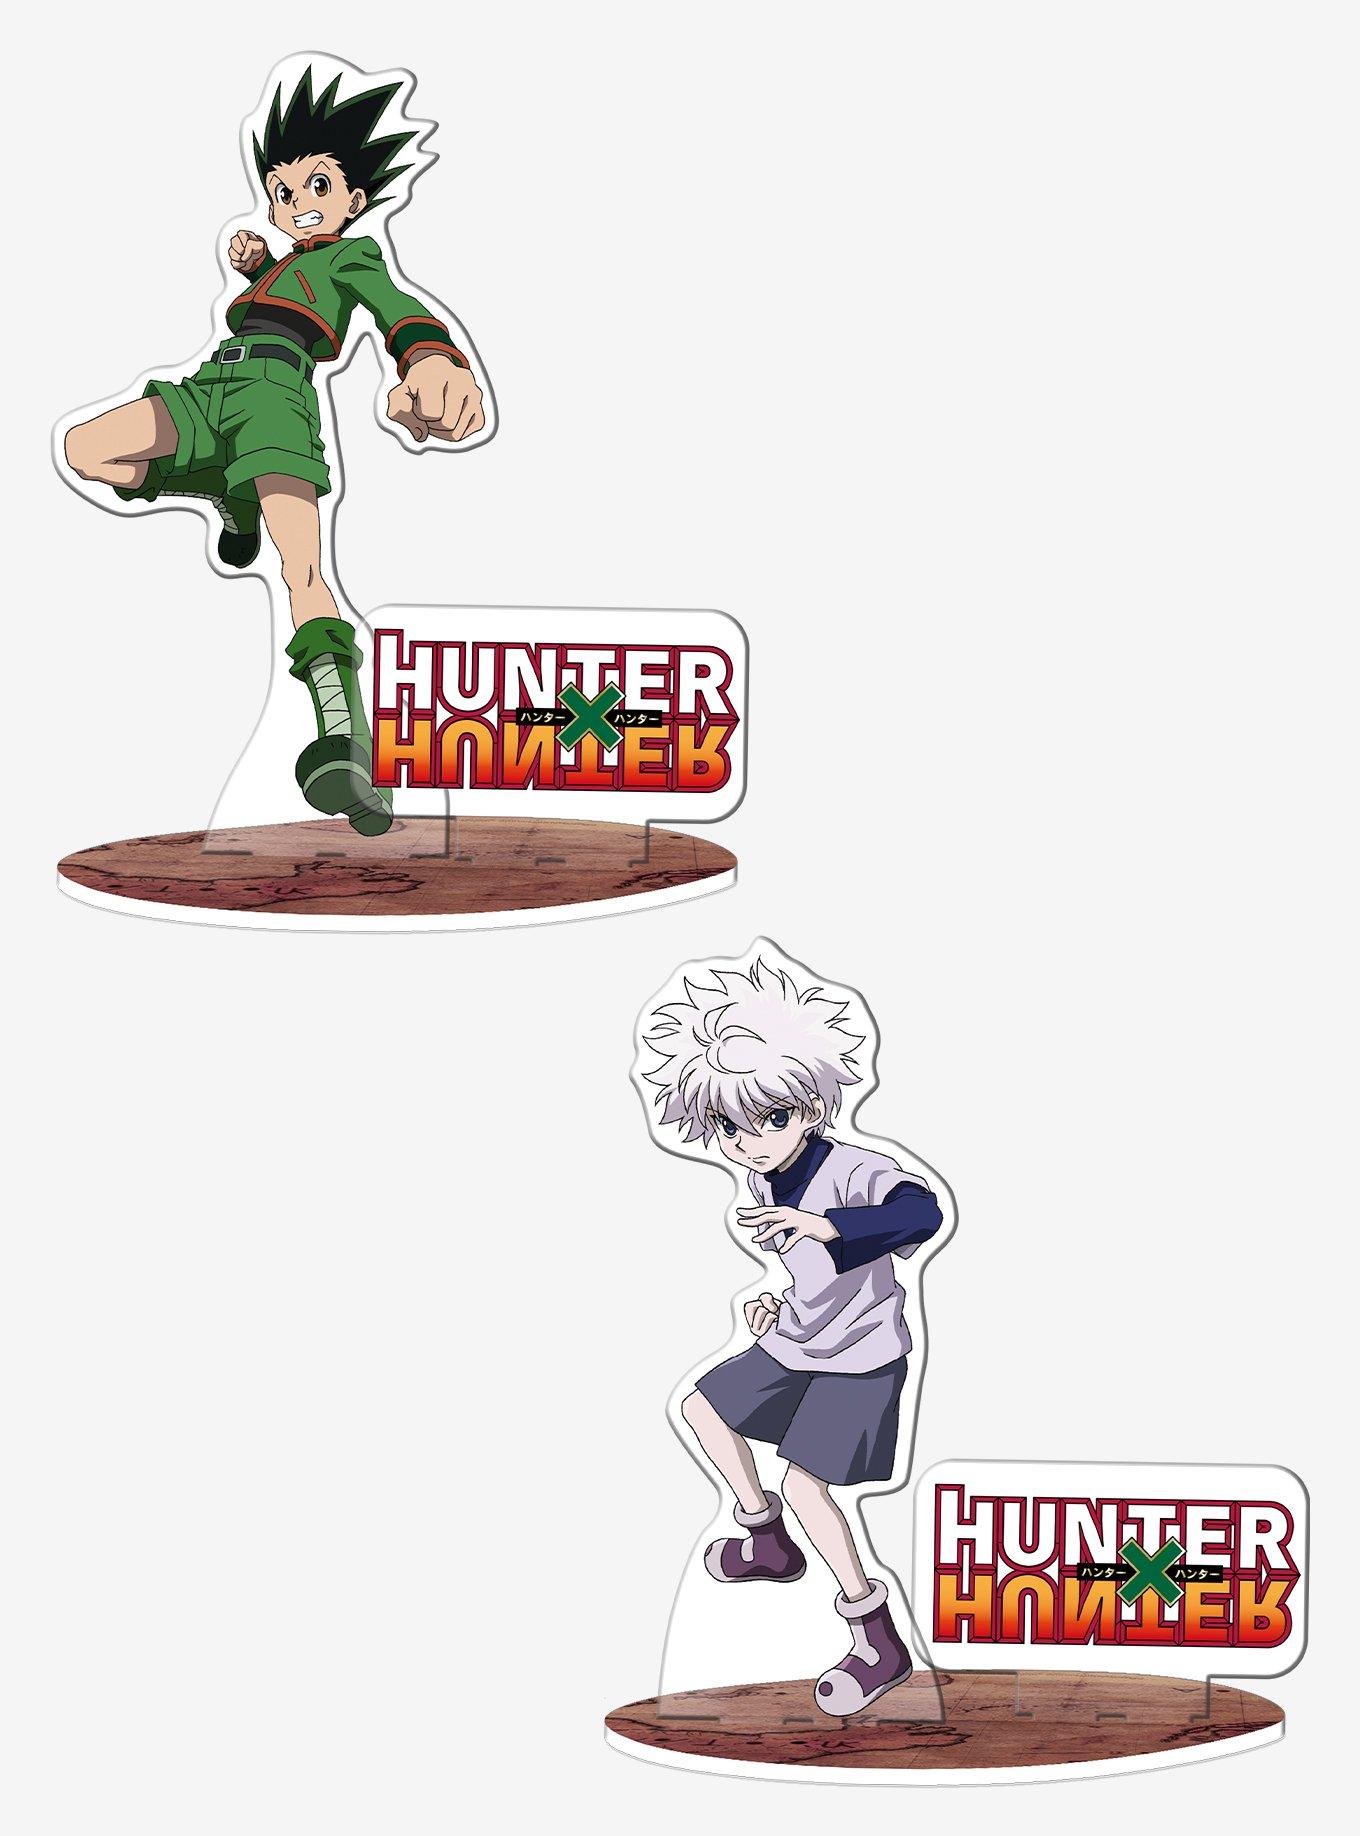 How to Play Gon Freecs in Dungeons & Dragons (Hunter x Hunter in